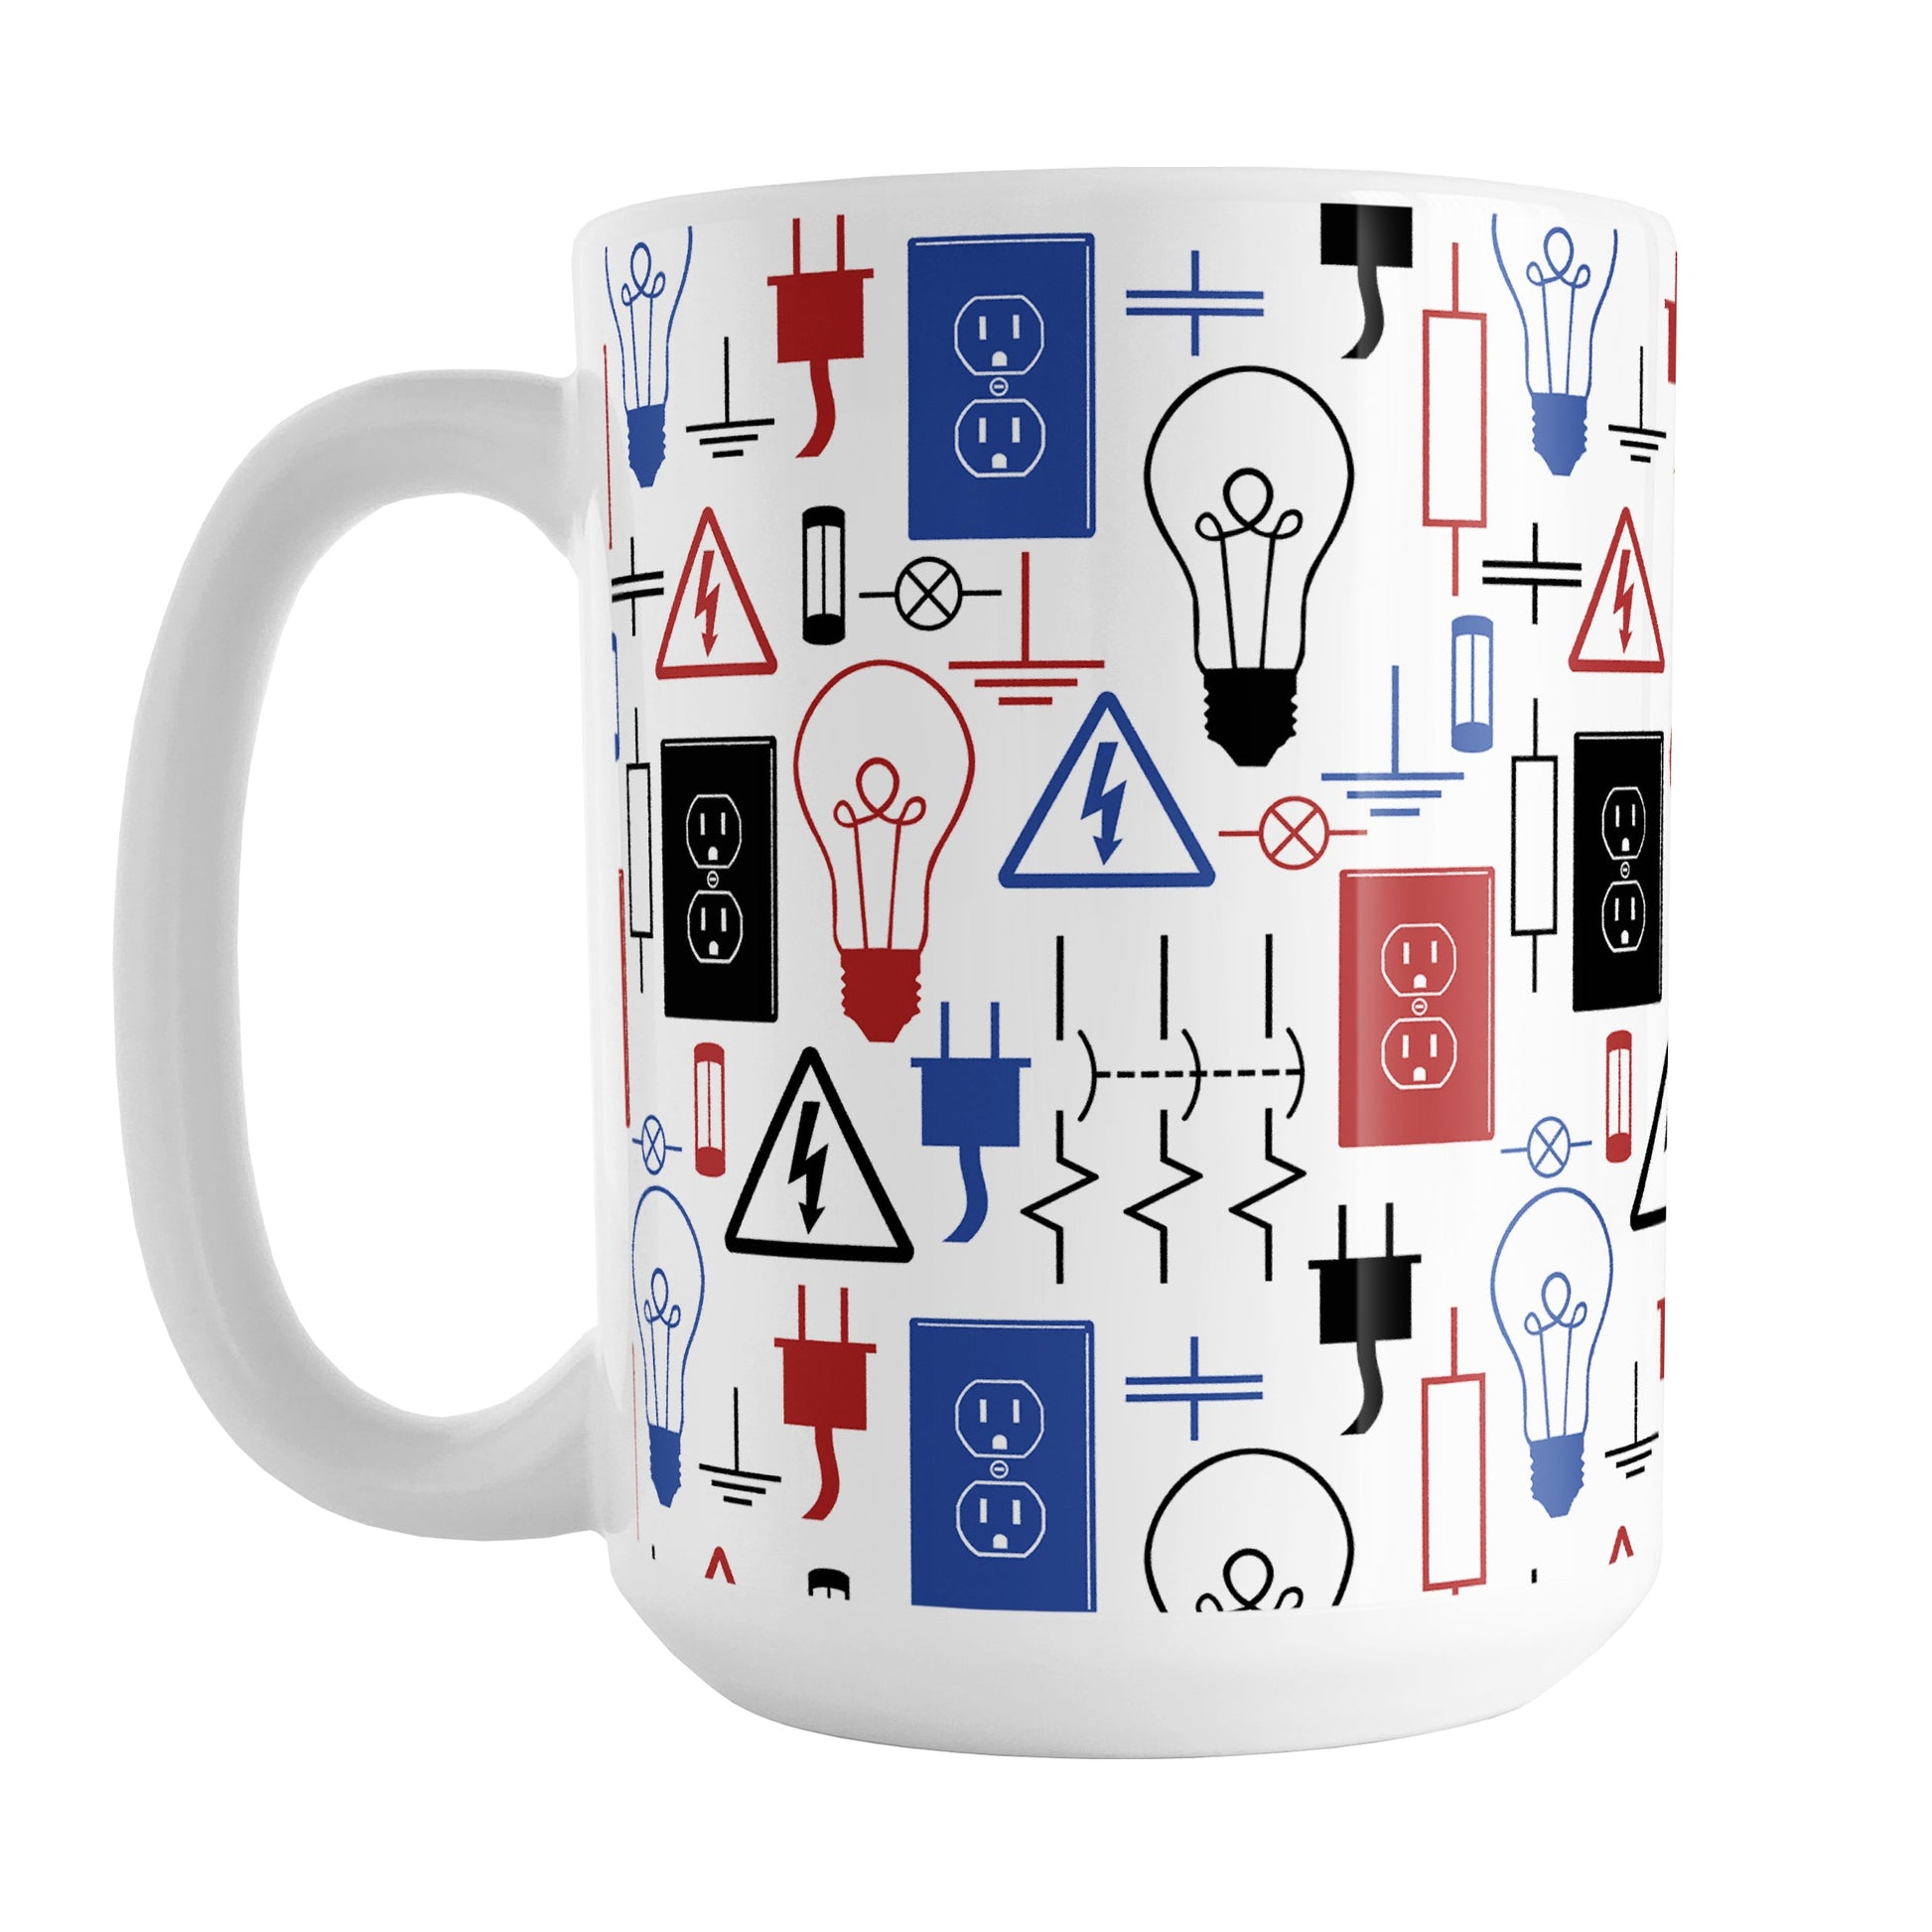 Red Blue Electrical Pattern Mug (15oz) at Amy's Coffee Mugs. A ceramic coffee mug designed with an electrical pattern with light bulbs, wall sockets, plugs, fuses, and other electricity symbols in red, blue, and black colors. This mug is perfect for people who work a trade as an electrician or love working with electronics. 